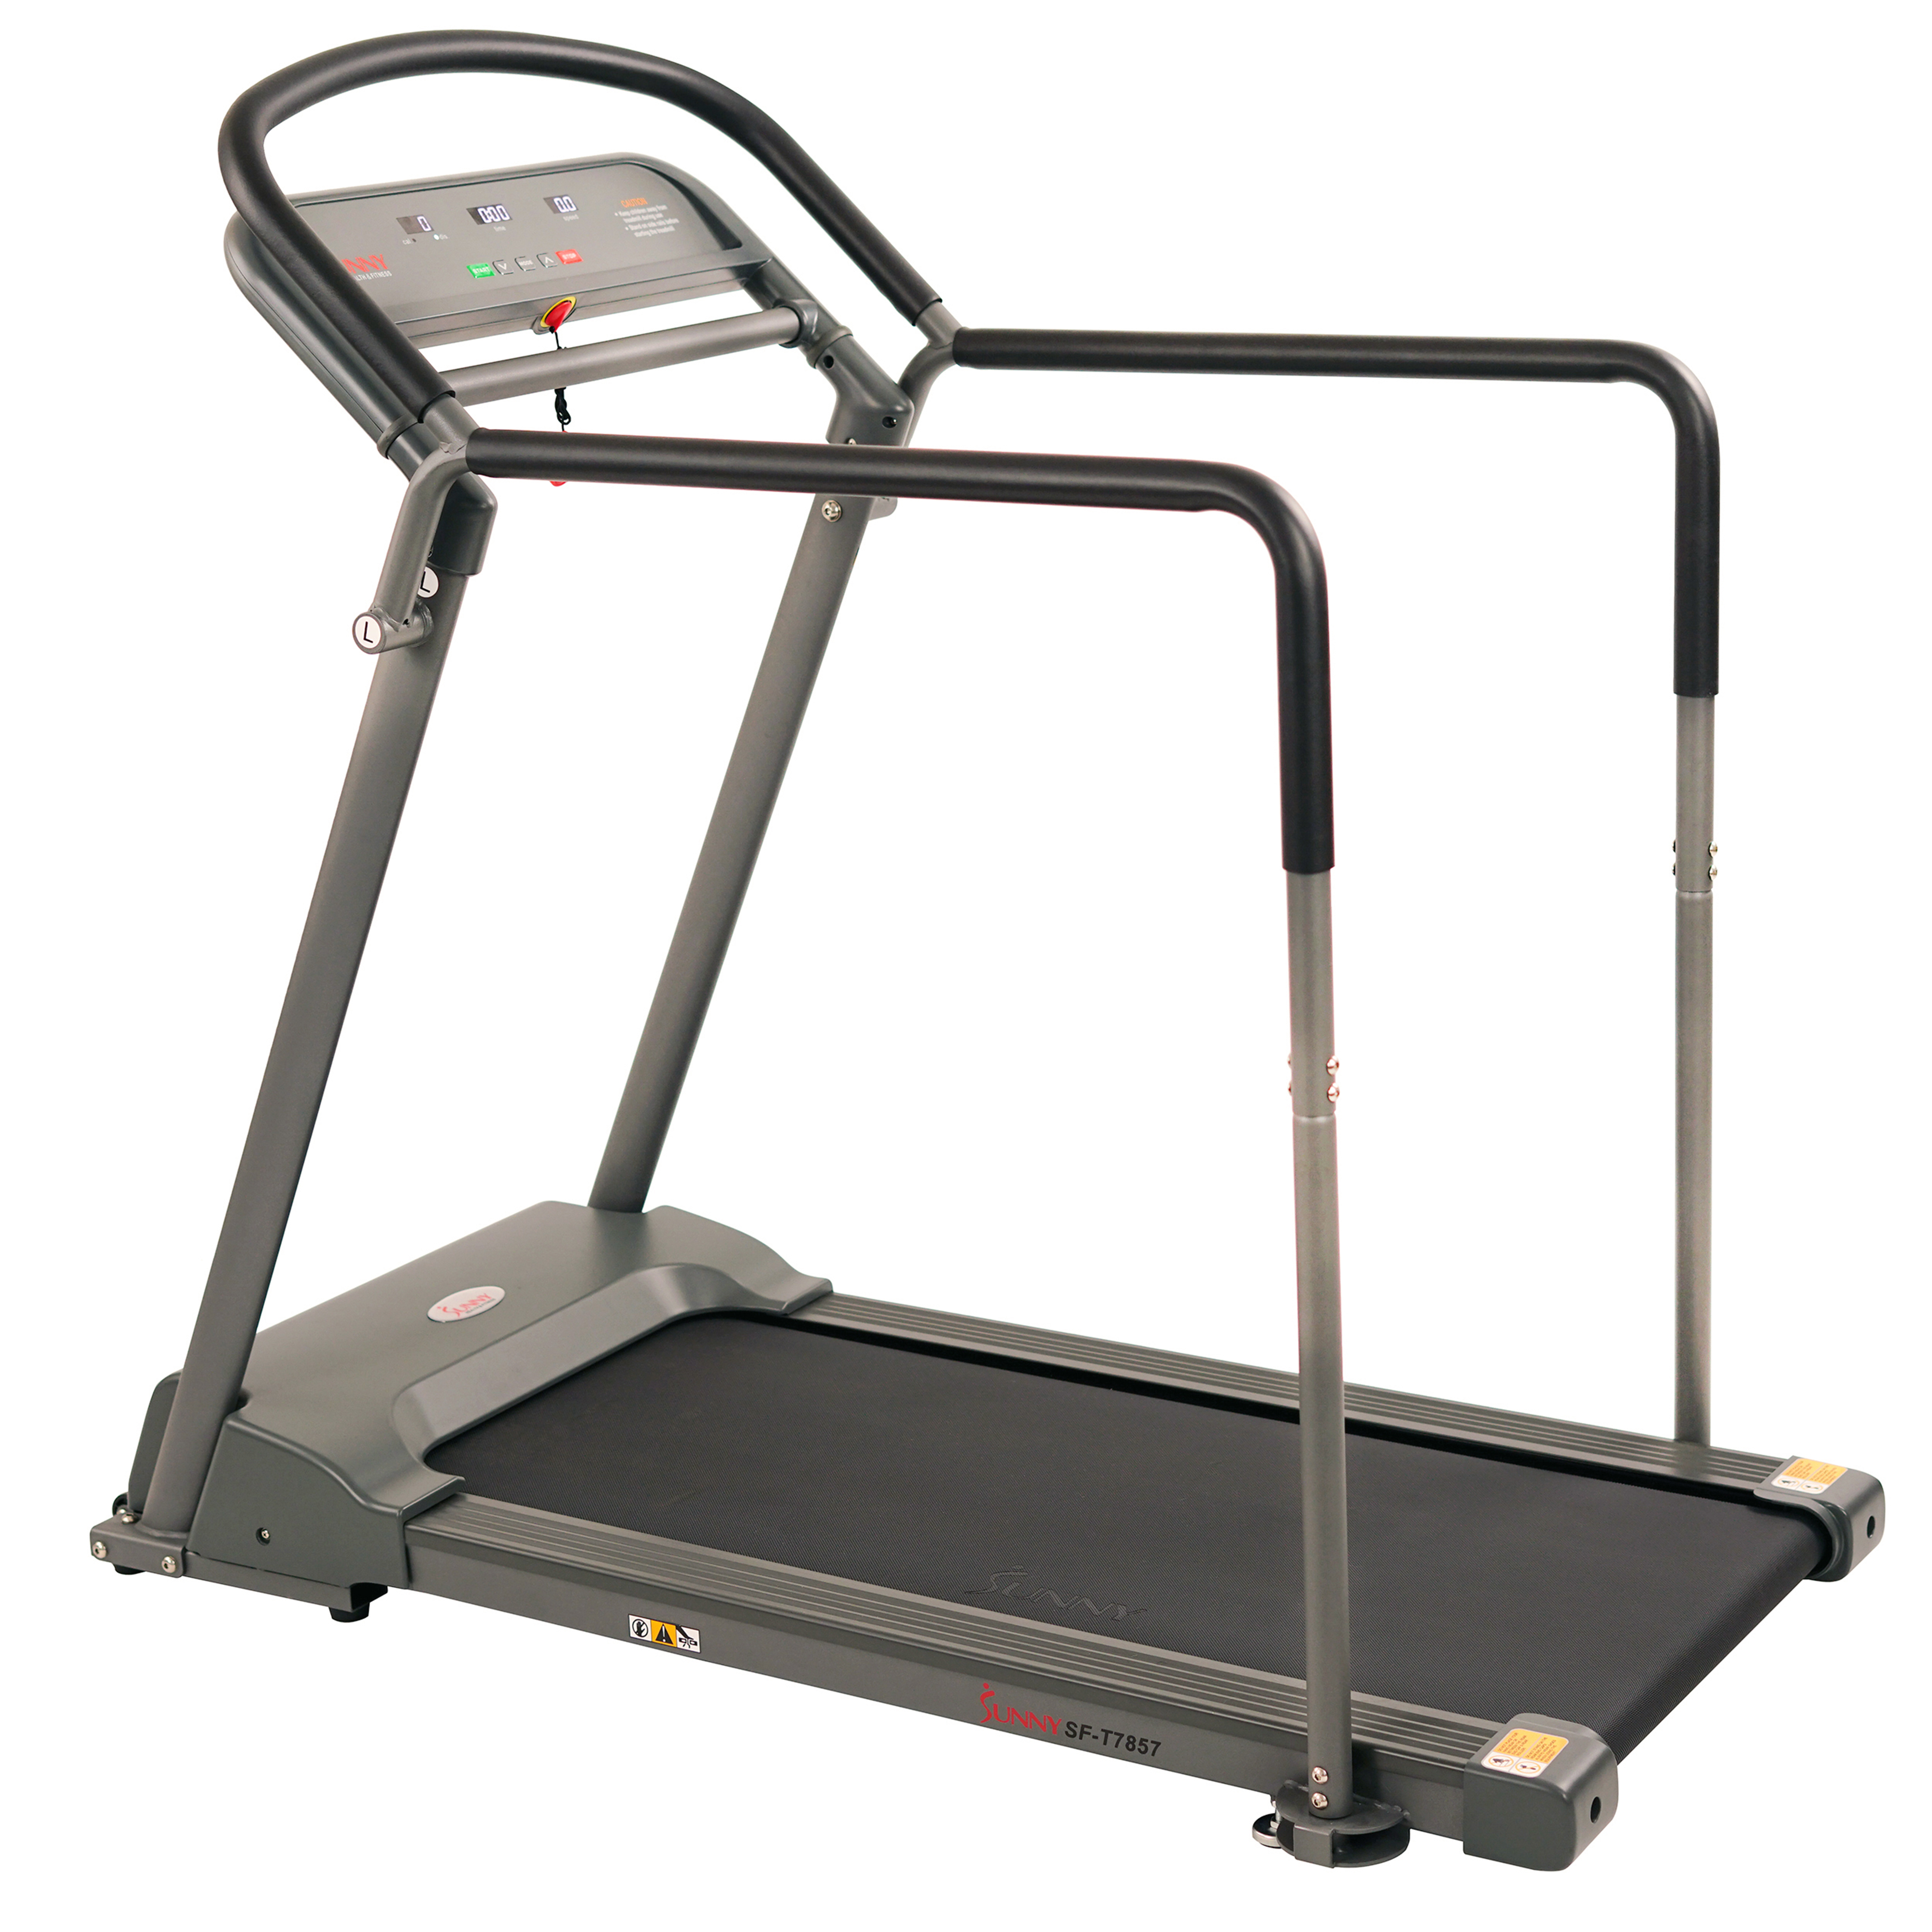 Sunny Health & Fitness Recovery Walking Pad Treadmill Machine, Low Profile Deck, Handrails for Mobility/Balance Support SF-T7857 - image 1 of 9